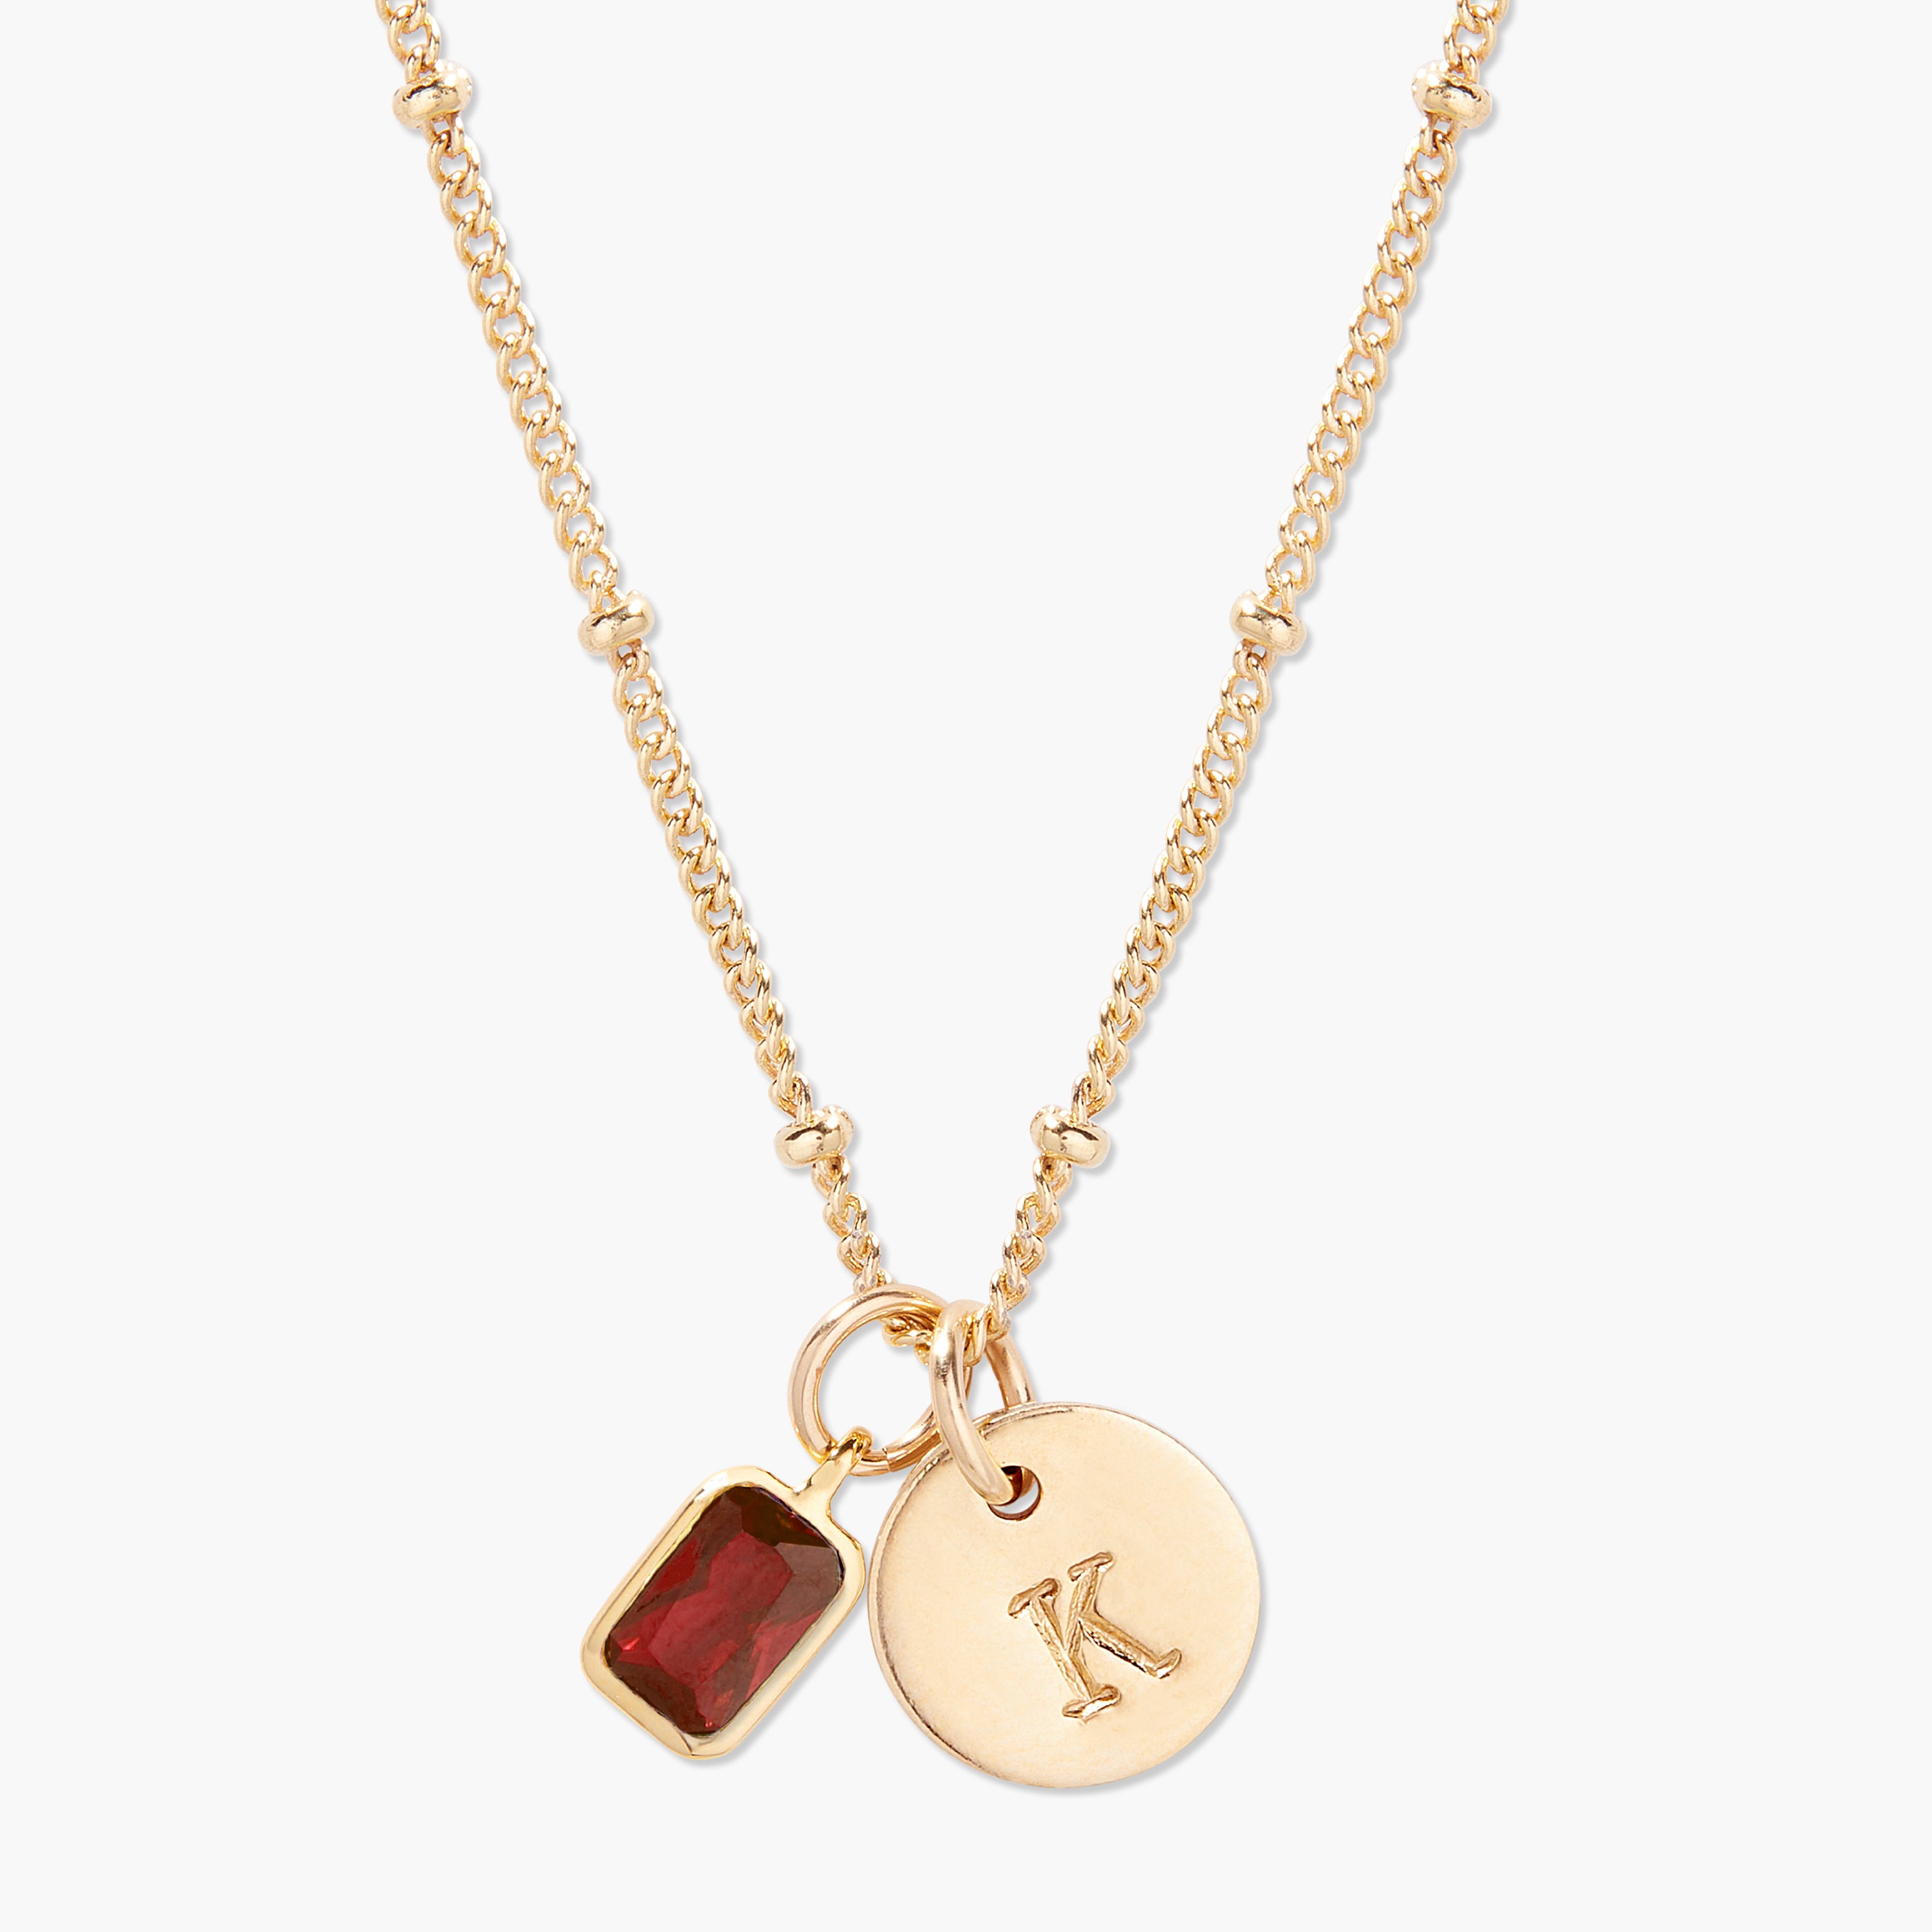 N Gold Initial Pendant Necklace